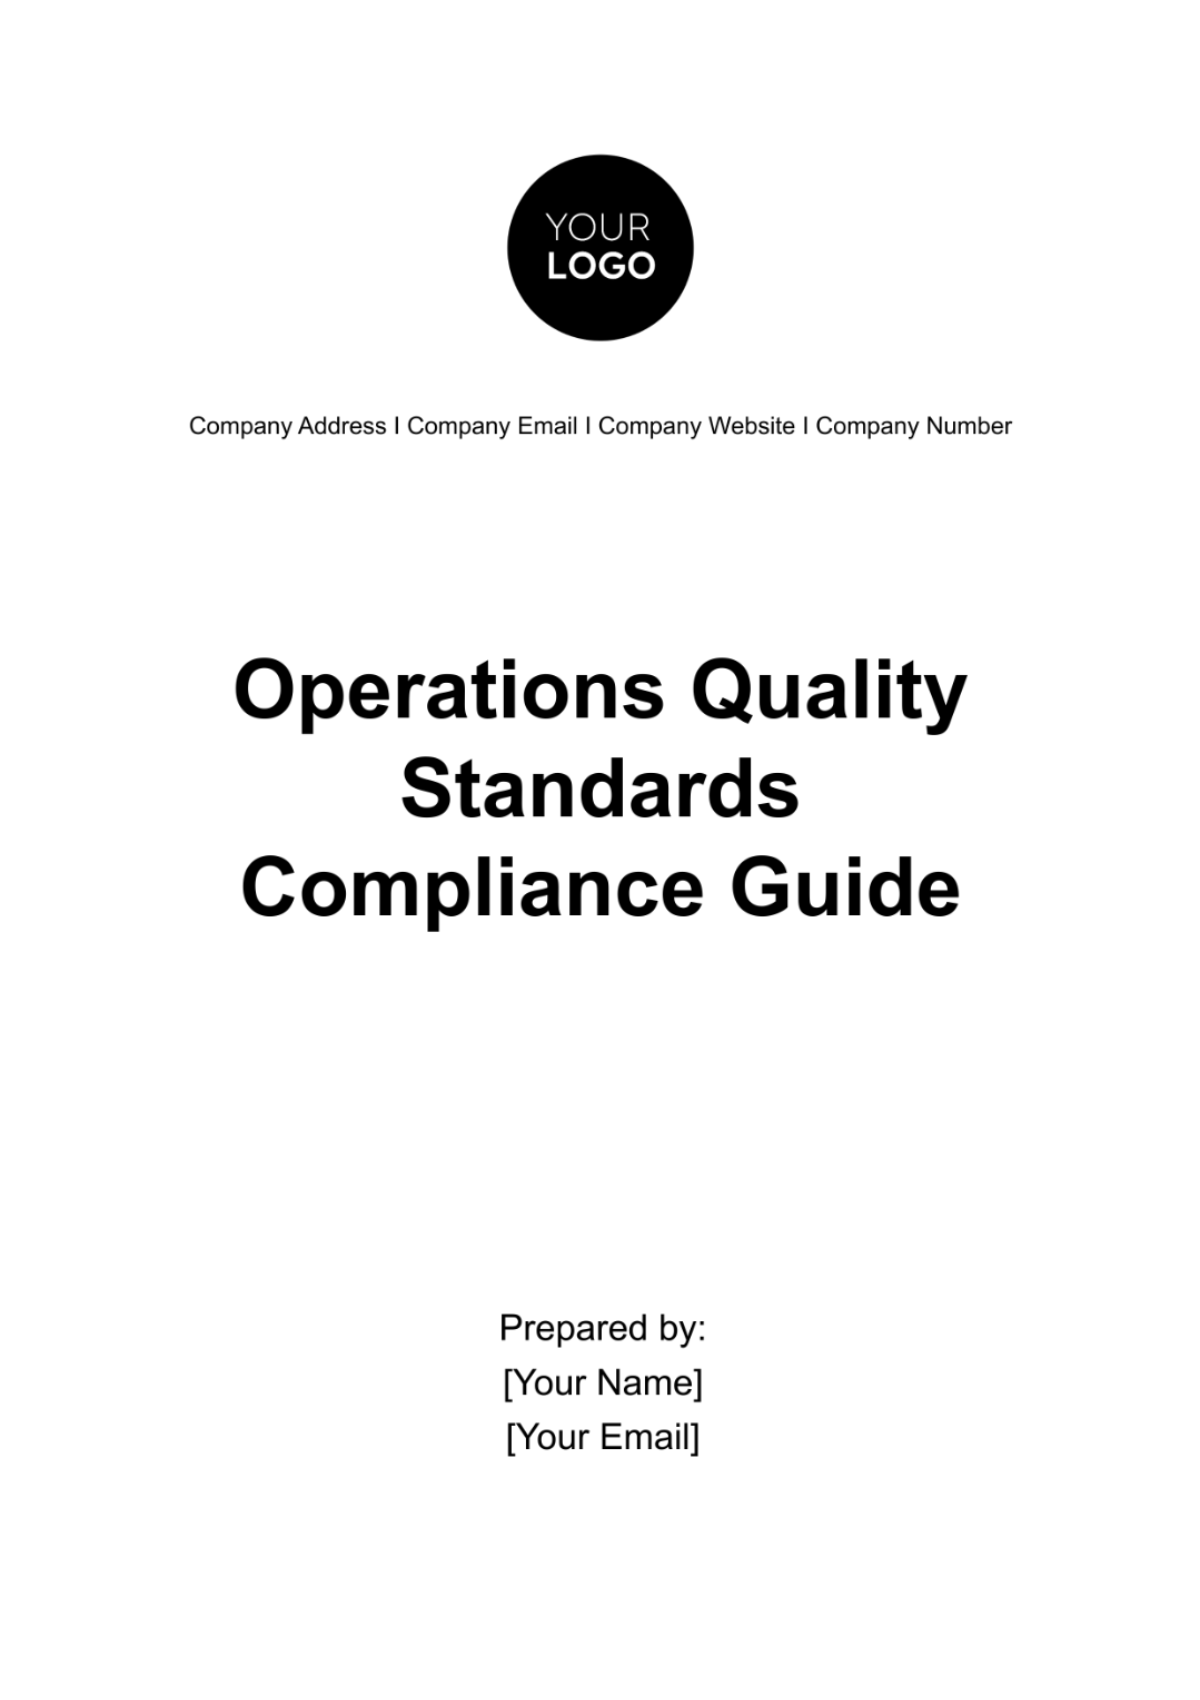 Operations Quality Standards Compliance Guide Template